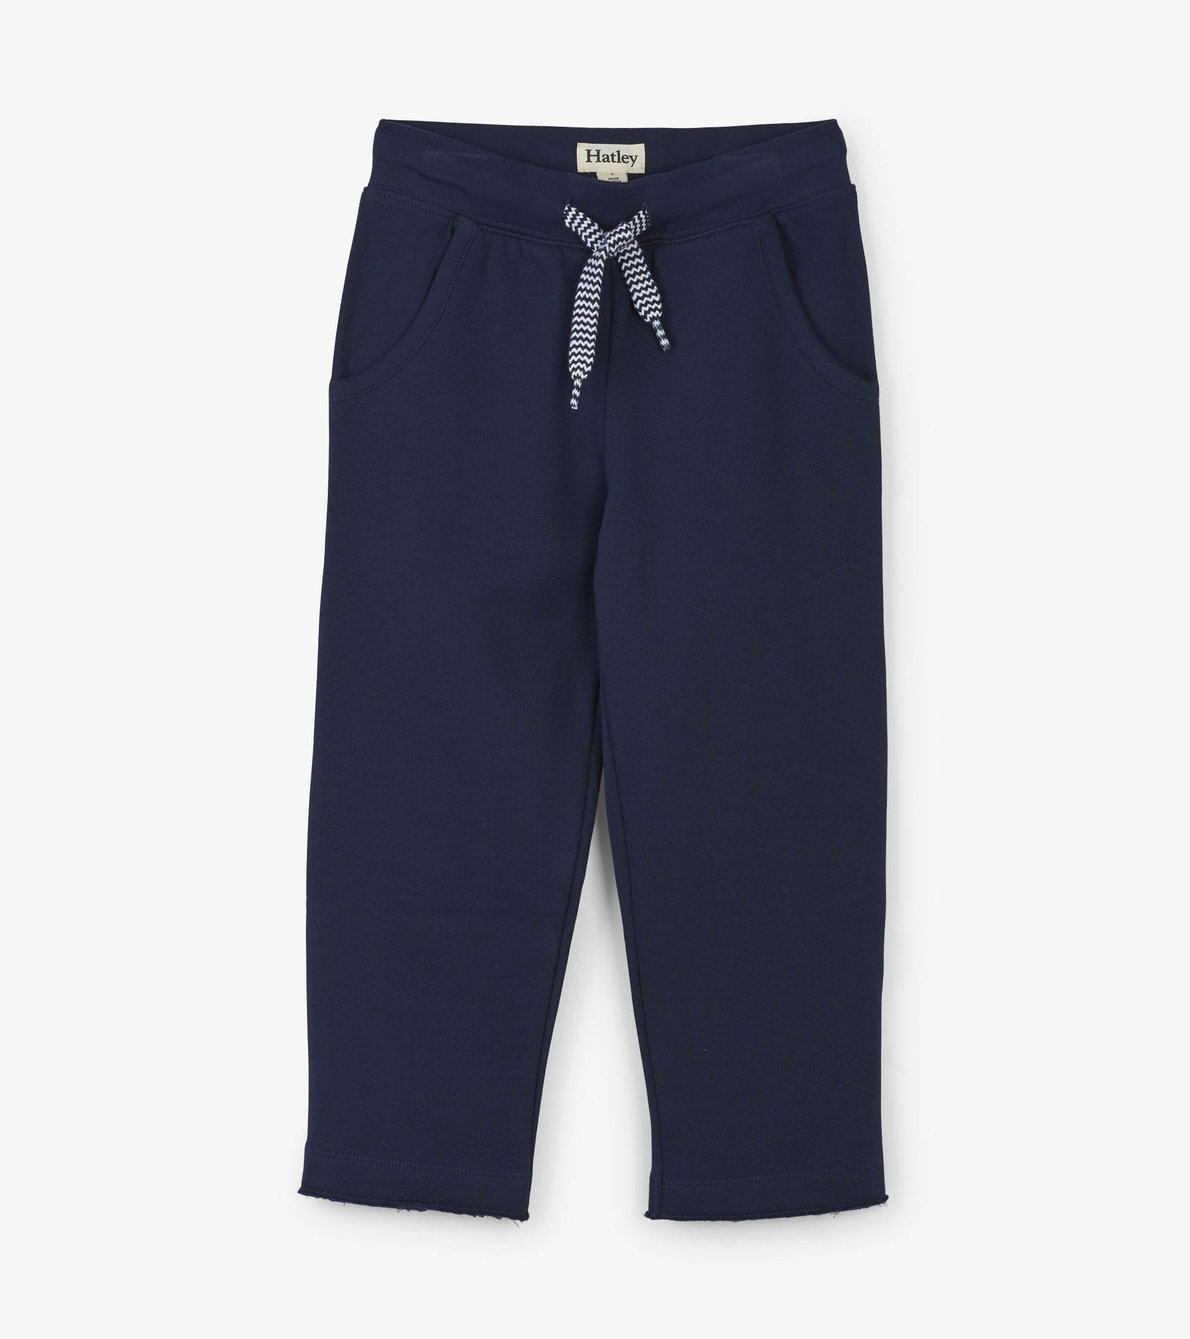 View larger image of Boys Blue Fleece Track Pants